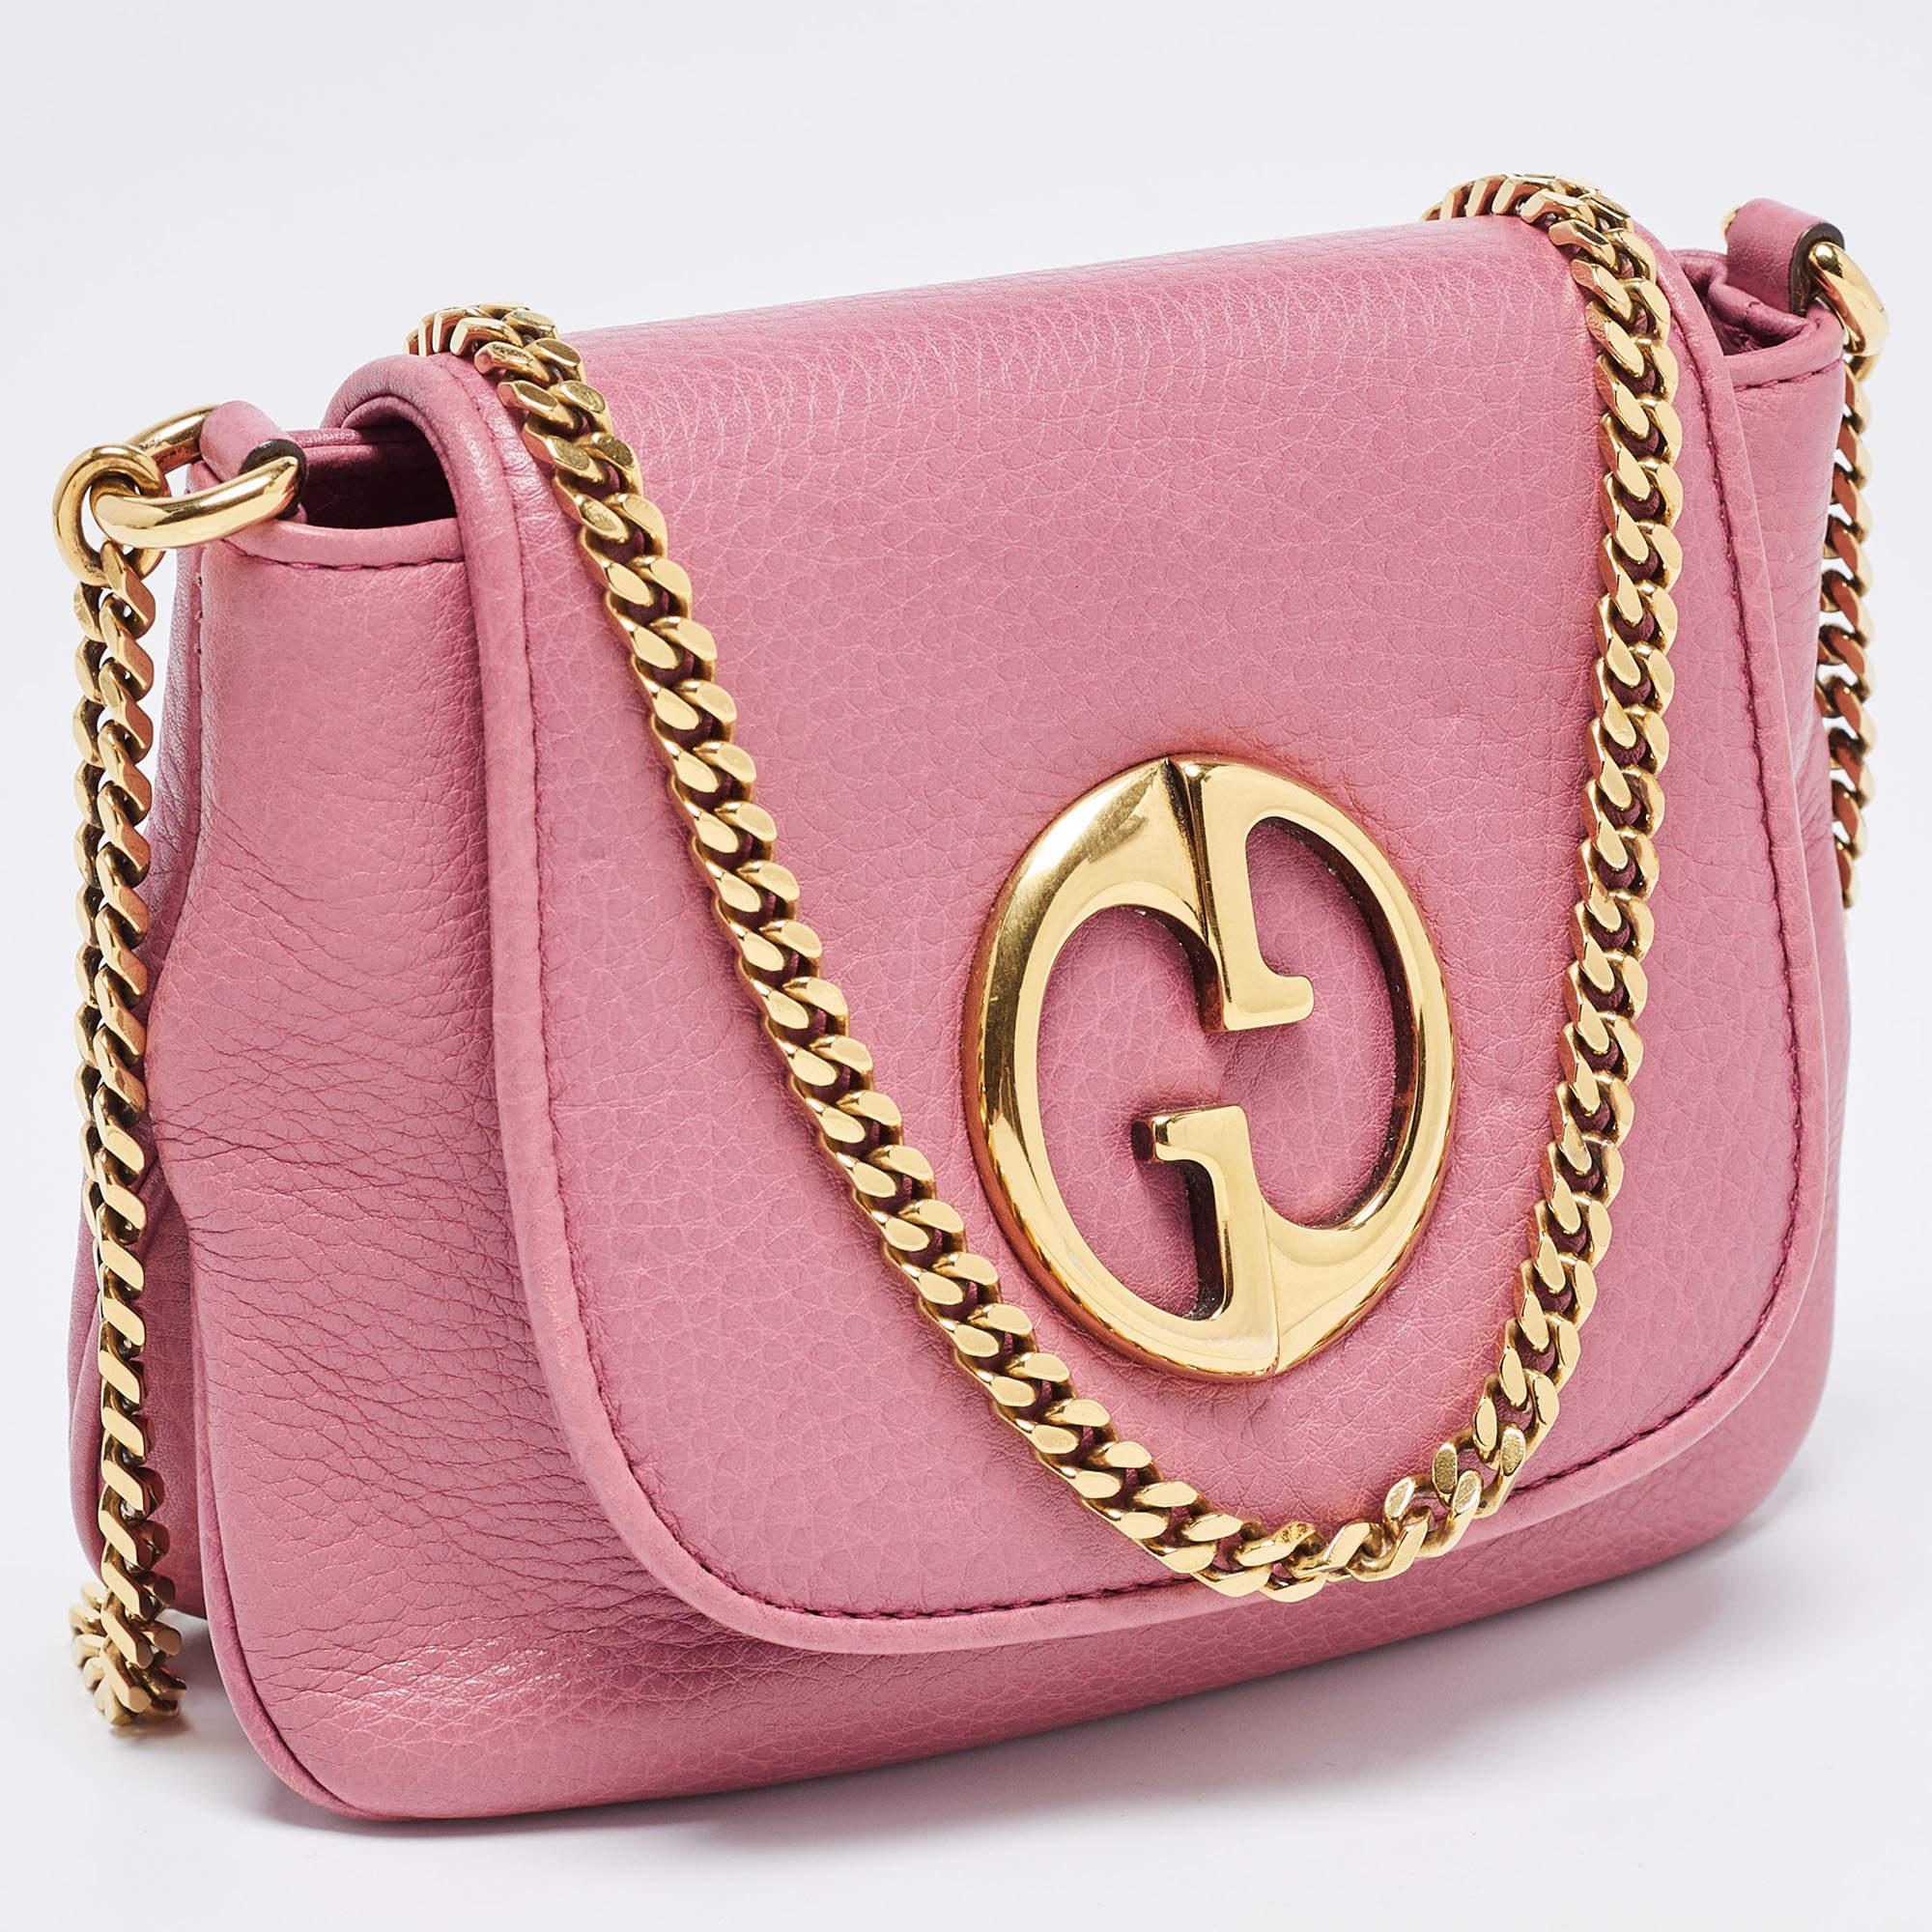 Women's Gucci Pink Leather Small 1973 Chain Crossbody Bag